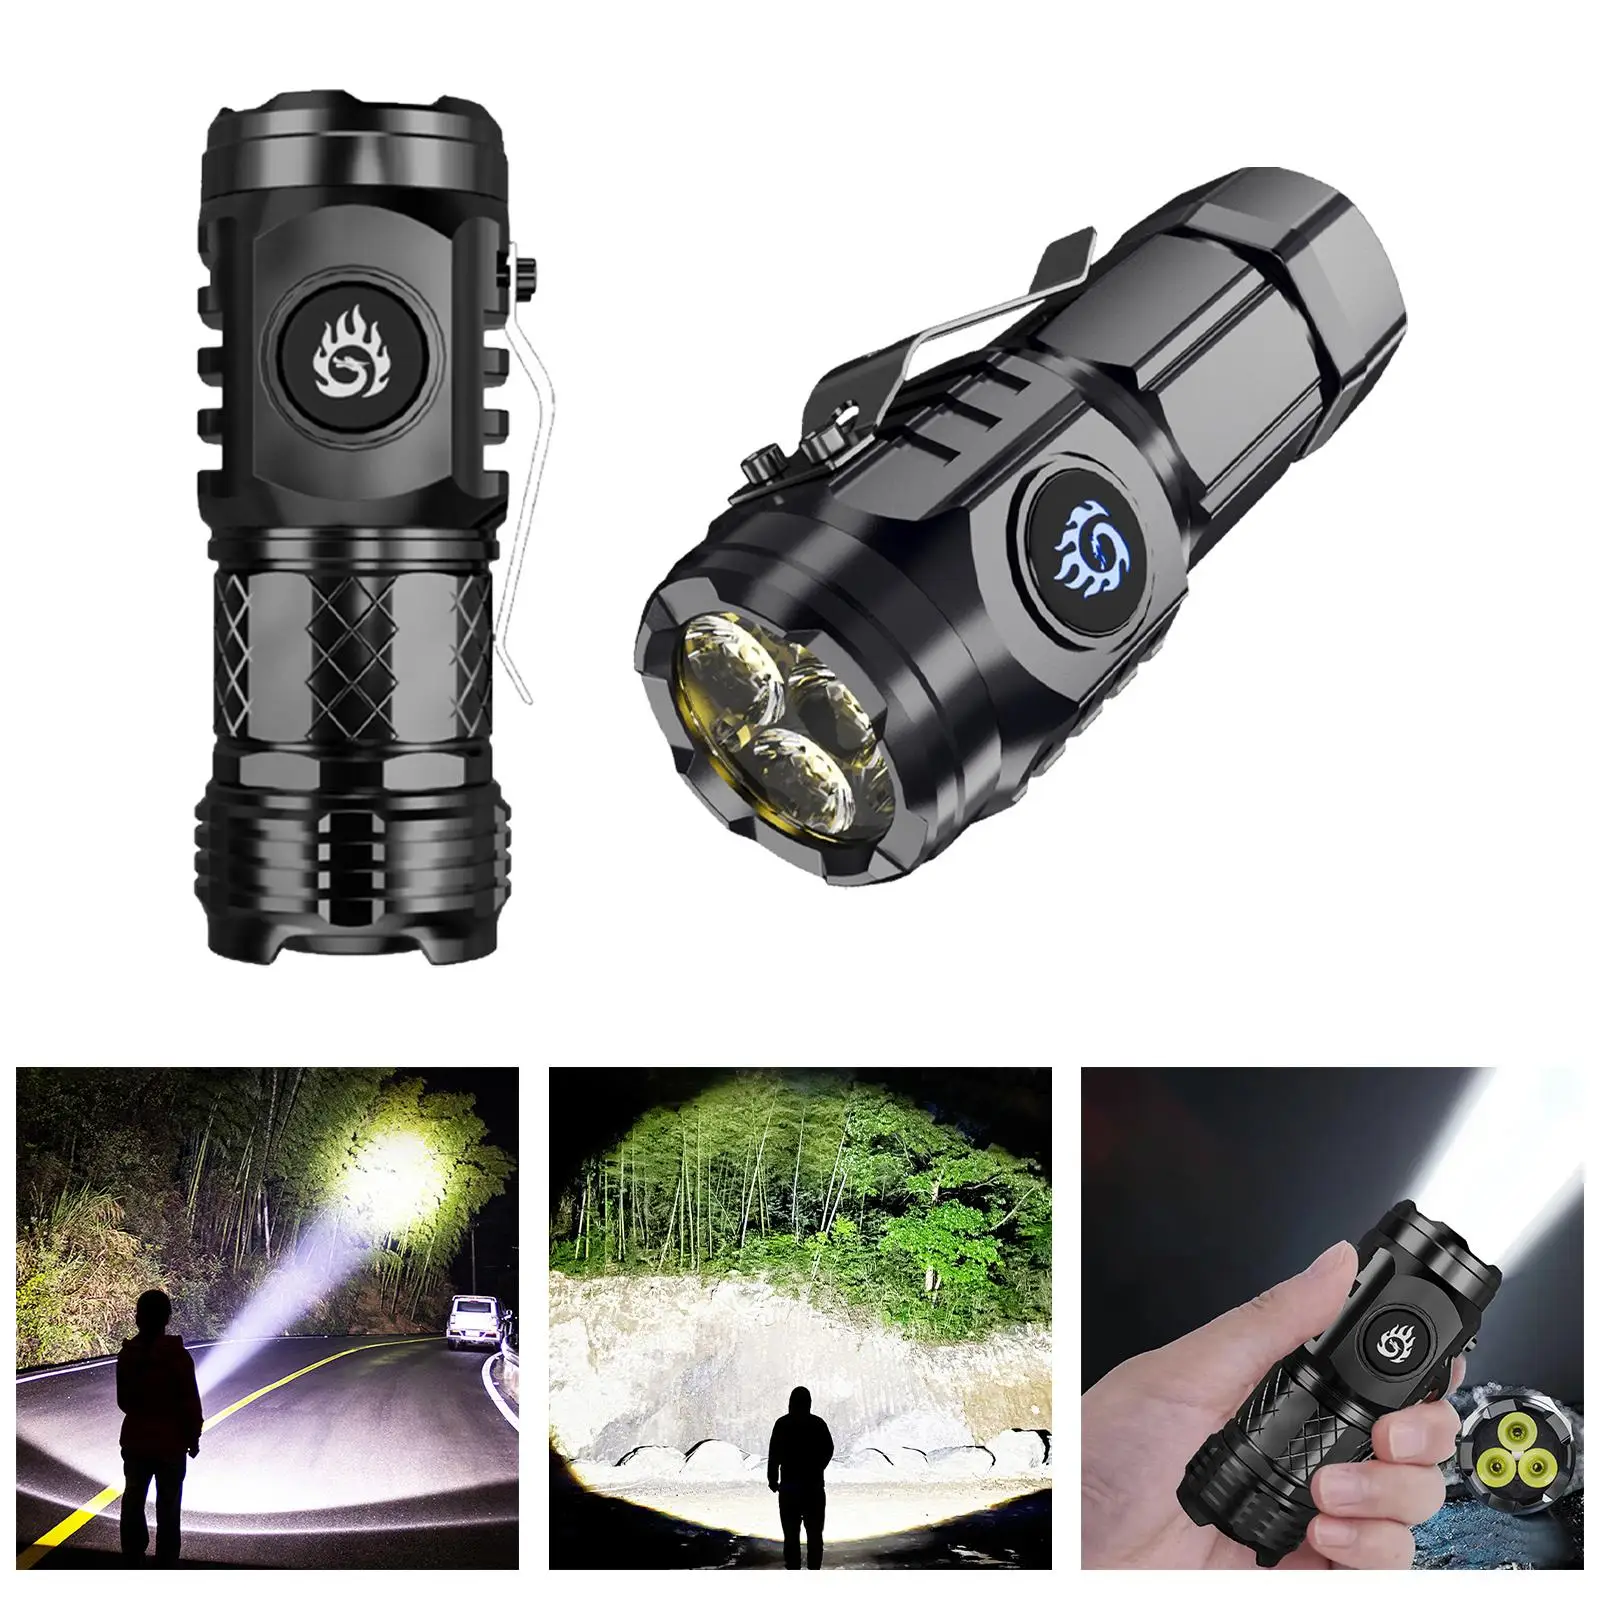 

Hand Held flashlights Rechargeable Waterproof Searchlight Hat Clip Light for Backpacking Night Walking Outdoor Survival Camping